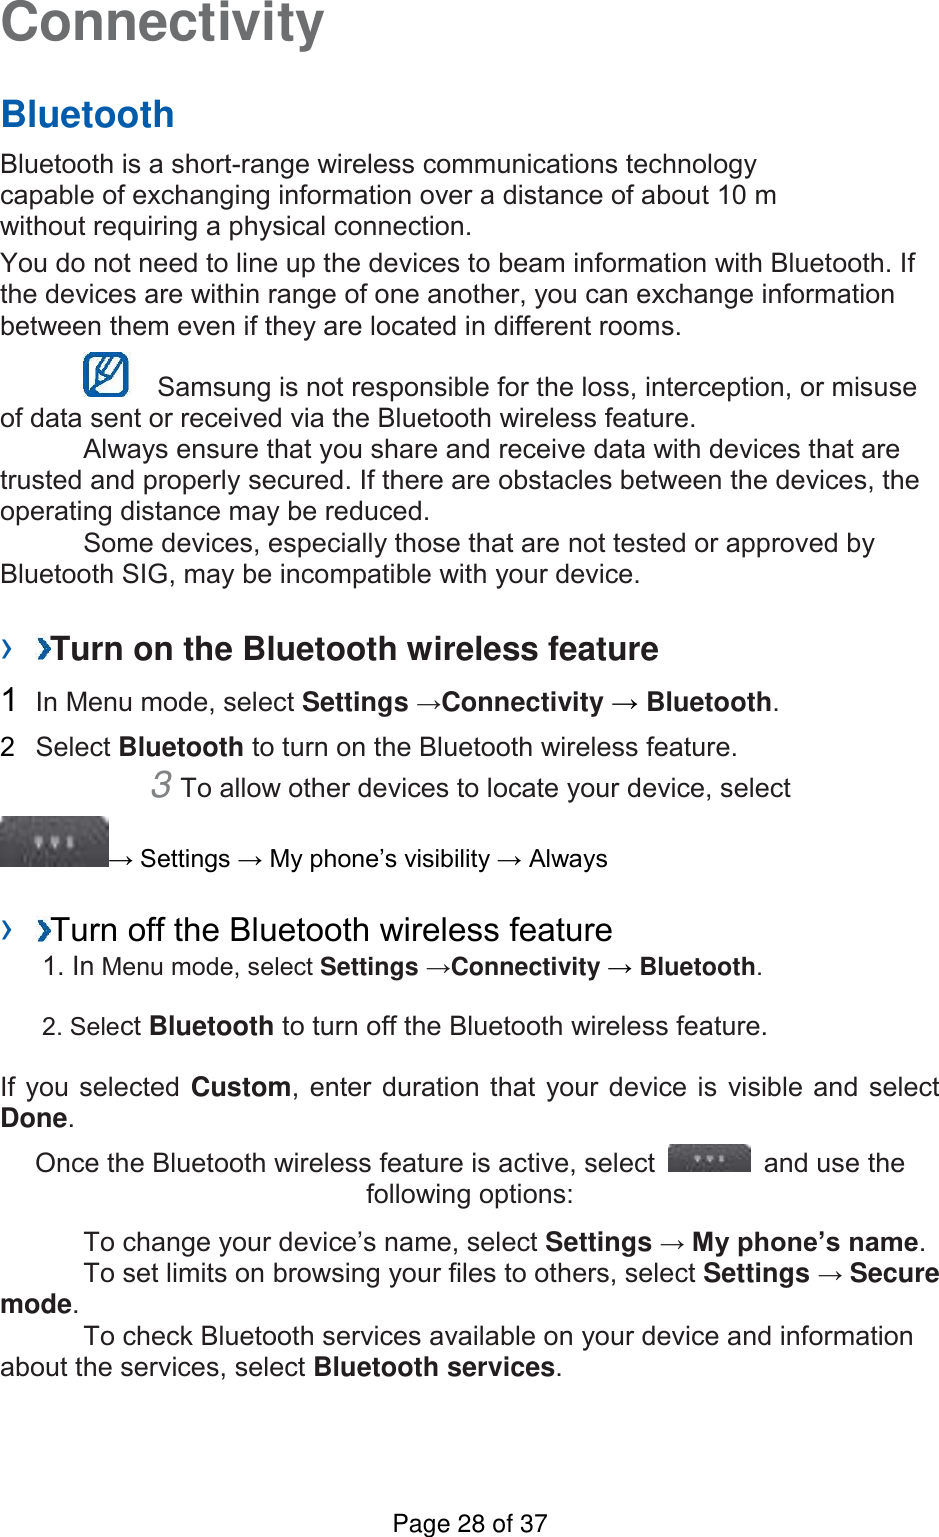 Connectivity   Bluetooth   Bluetooth is a short-range wireless communications technology capable of exchanging information over a distance of about 10 m without requiring a physical connection.   You do not need to line up the devices to beam information with Bluetooth. If the devices are within range of one another, you can exchange information between them even if they are located in different rooms.      Samsung is not responsible for the loss, interception, or misuse of data sent or received via the Bluetooth wireless feature.     Always ensure that you share and receive data with devices that are trusted and properly secured. If there are obstacles between the devices, the operating distance may be reduced.     Some devices, especially those that are not tested or approved by Bluetooth SIG, may be incompatible with your device.    ›  Turn on the Bluetooth wireless feature   1  In Menu mode, select Settings →Connectivity → Bluetooth.   2  Select Bluetooth to turn on the Bluetooth wireless feature.   3 To allow other devices to locate your device, select   → Settings → My phone’s visibility → Always    ›  Turn off the Bluetooth wireless feature   1. In Menu mode, select Settings →Connectivity → Bluetooth. 2. Select Bluetooth to turn off the Bluetooth wireless feature. If you selected Custom, enter duration that your device is visible and select Done.   Once the Bluetooth wireless feature is active, select    and use the following options:    To change your device’s name, select Settings → My phone’s name.     To set limits on browsing your files to others, select Settings → Secure mode.     To check Bluetooth services available on your device and information about the services, select Bluetooth services.    Page 28 of 37